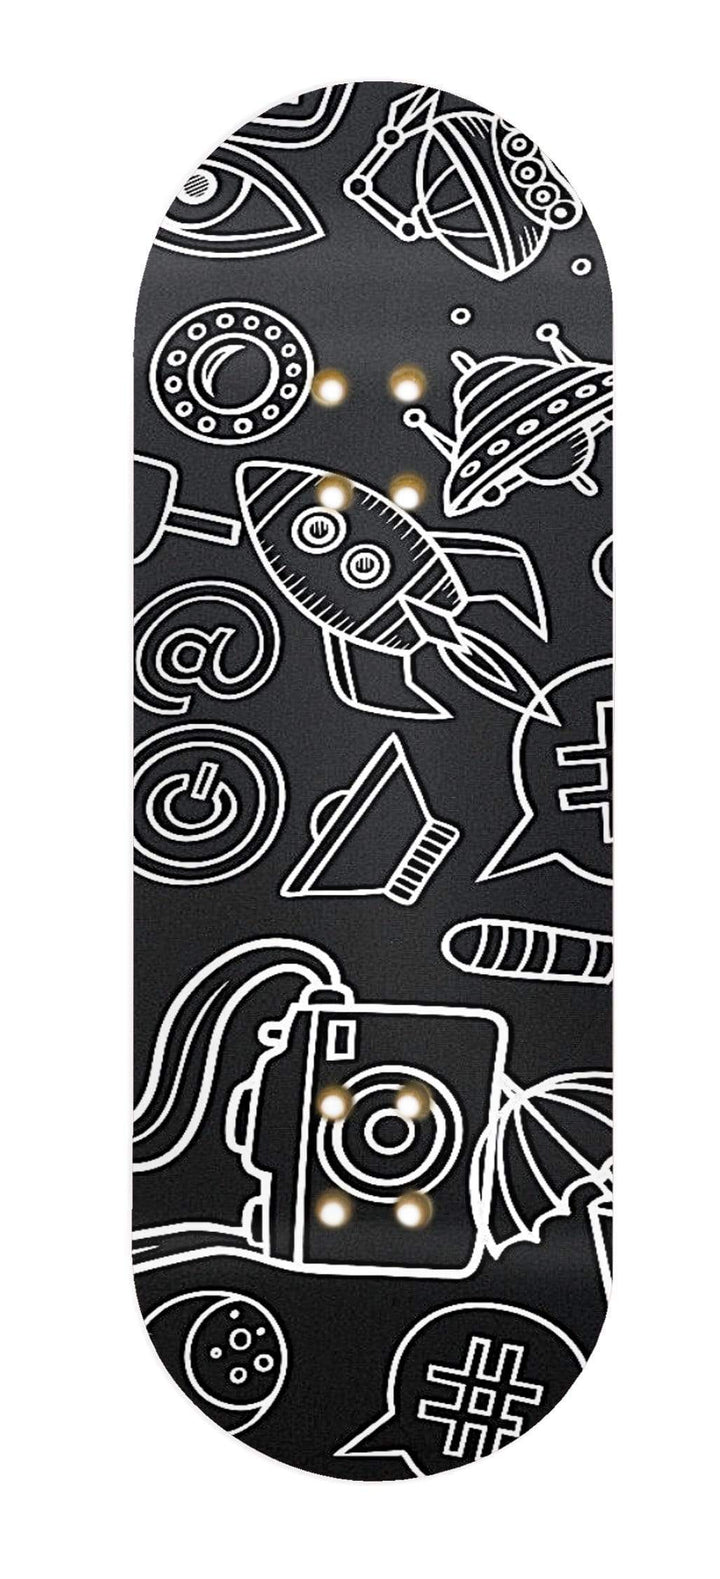 Teak Tuning Limited Edition "Black & White Space Sketch" Deck Graphic Wrap - 35mm x 110mm